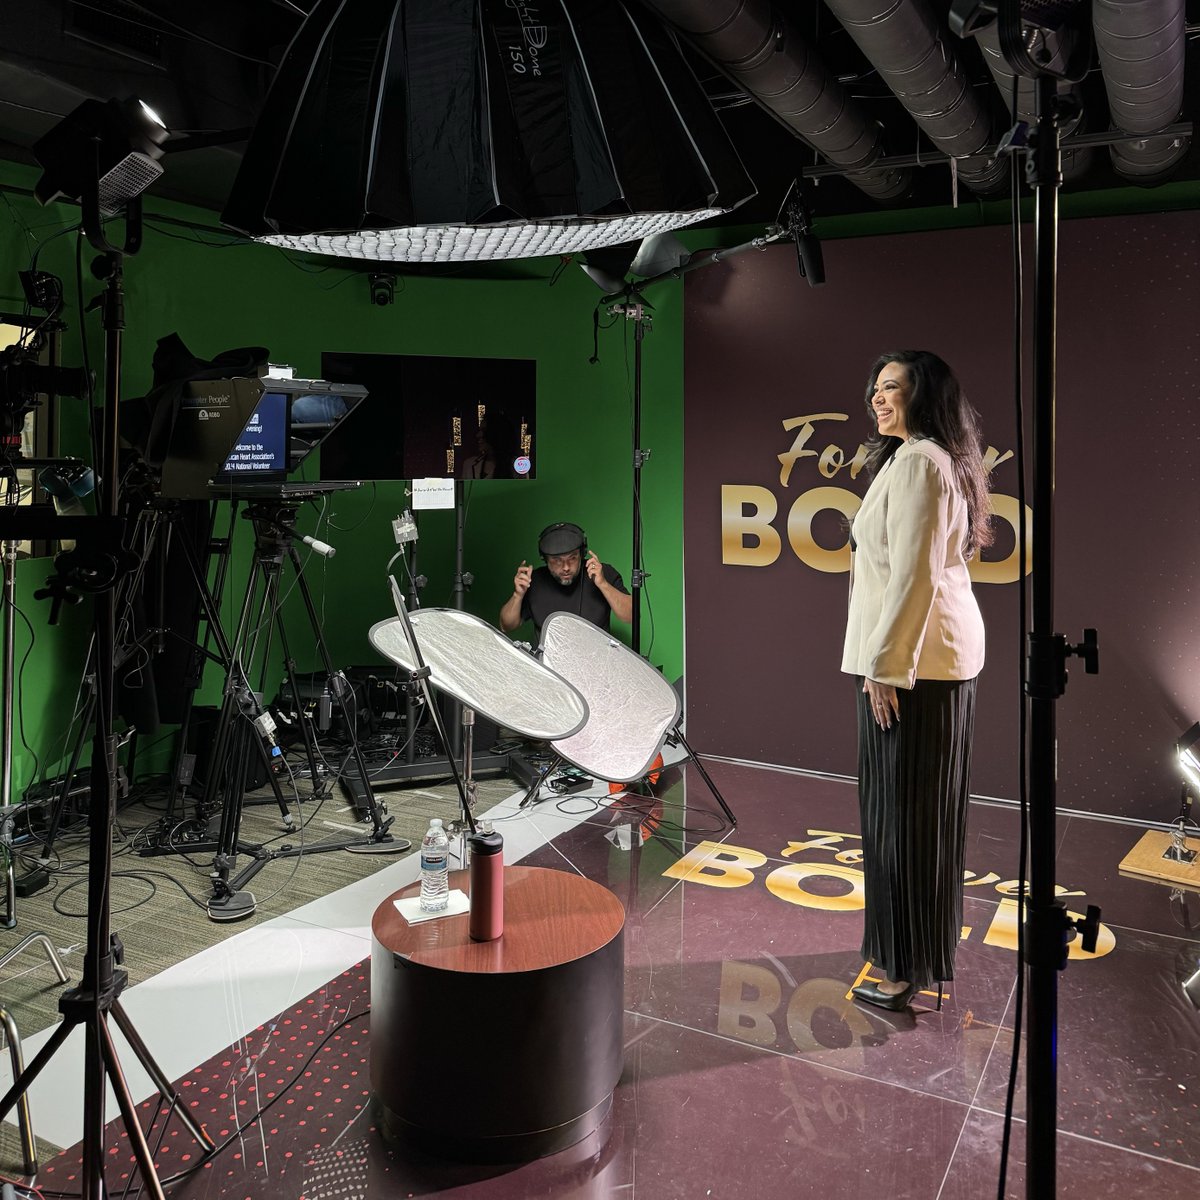 Behind the scenes of the 2024 Forever Bold National Volunteer Awards, with our incredible host, @KristinDiazTv! We’ll be coming to you LIVE on YouTube tomorrow, Thursday, May 2 from 6-8 p.m. CST. We can’t wait to see you there: spr.ly/6014jJpg6 #AwardswithHeart